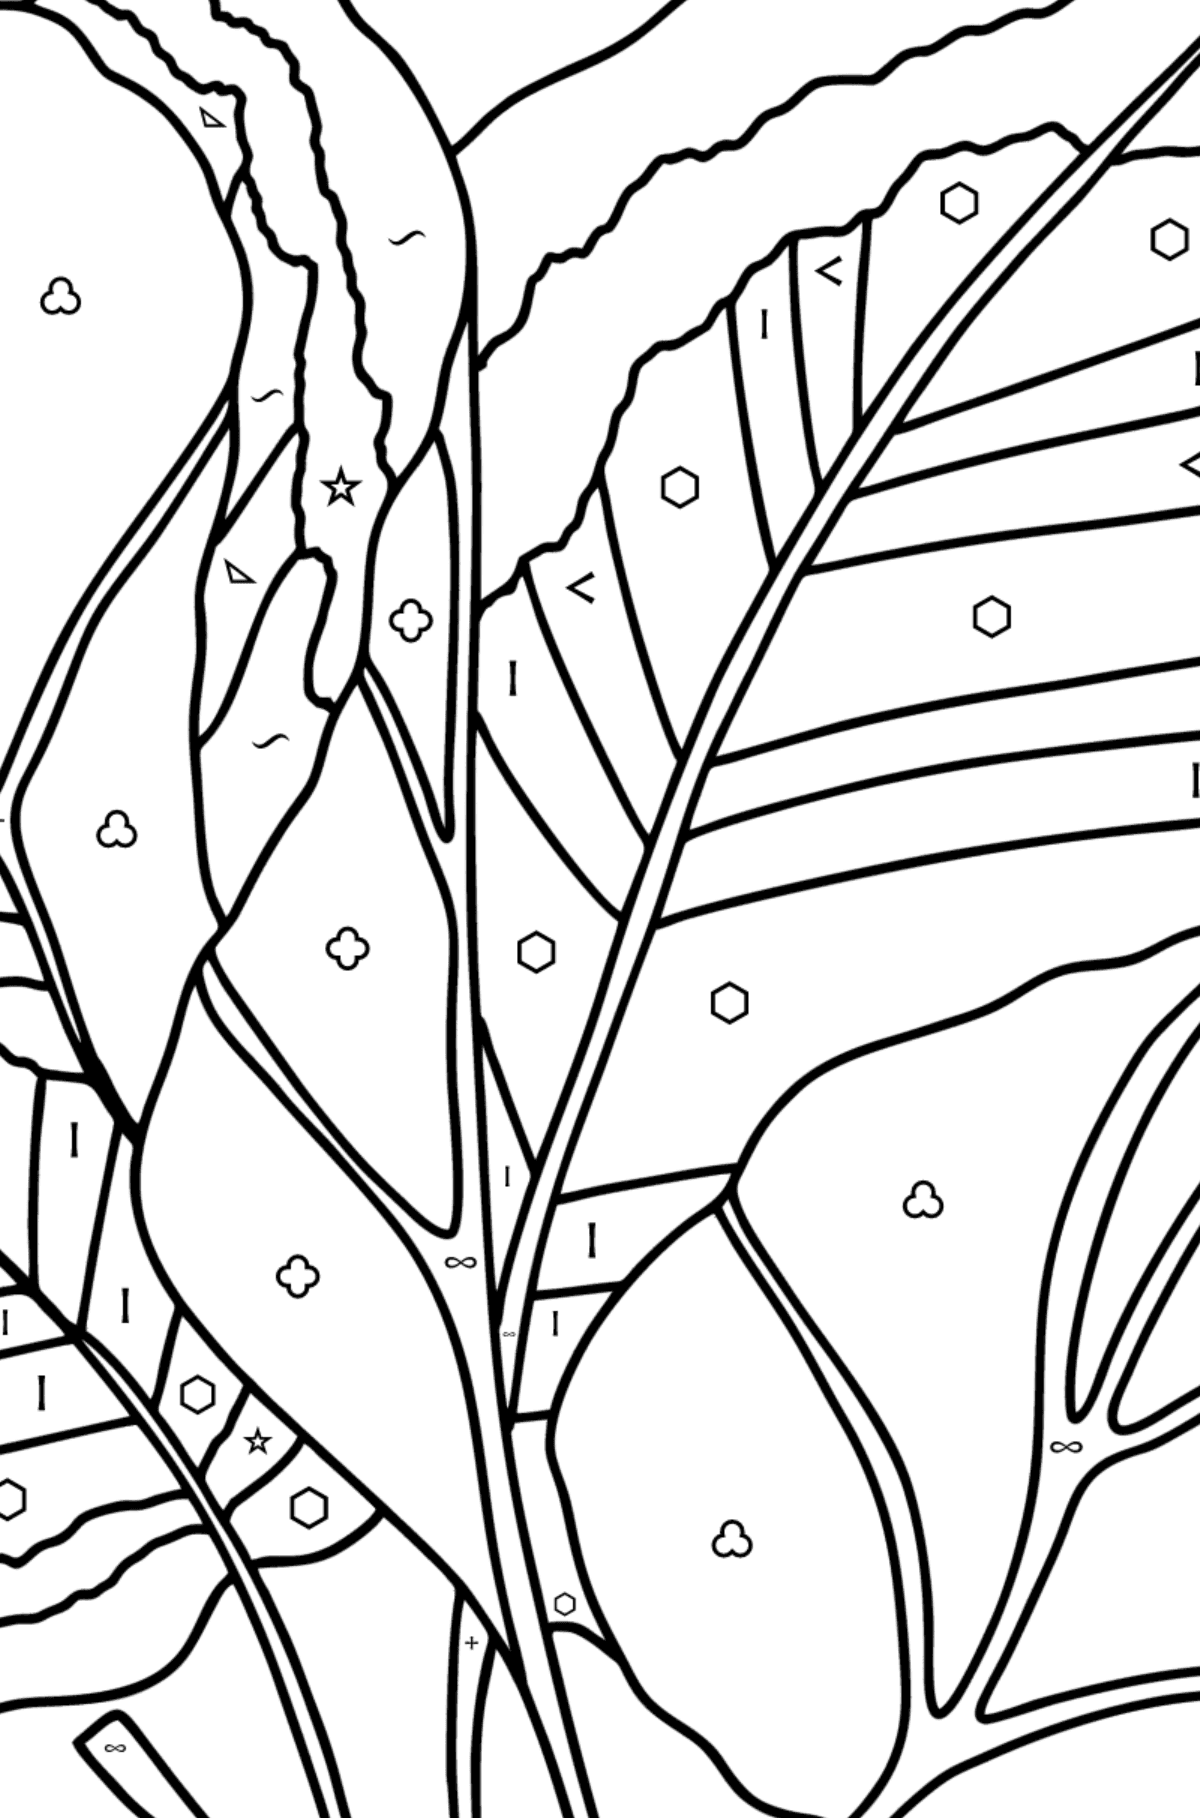 Arrowroot coloring page - Coloring by Symbols and Geometric Shapes for Kids